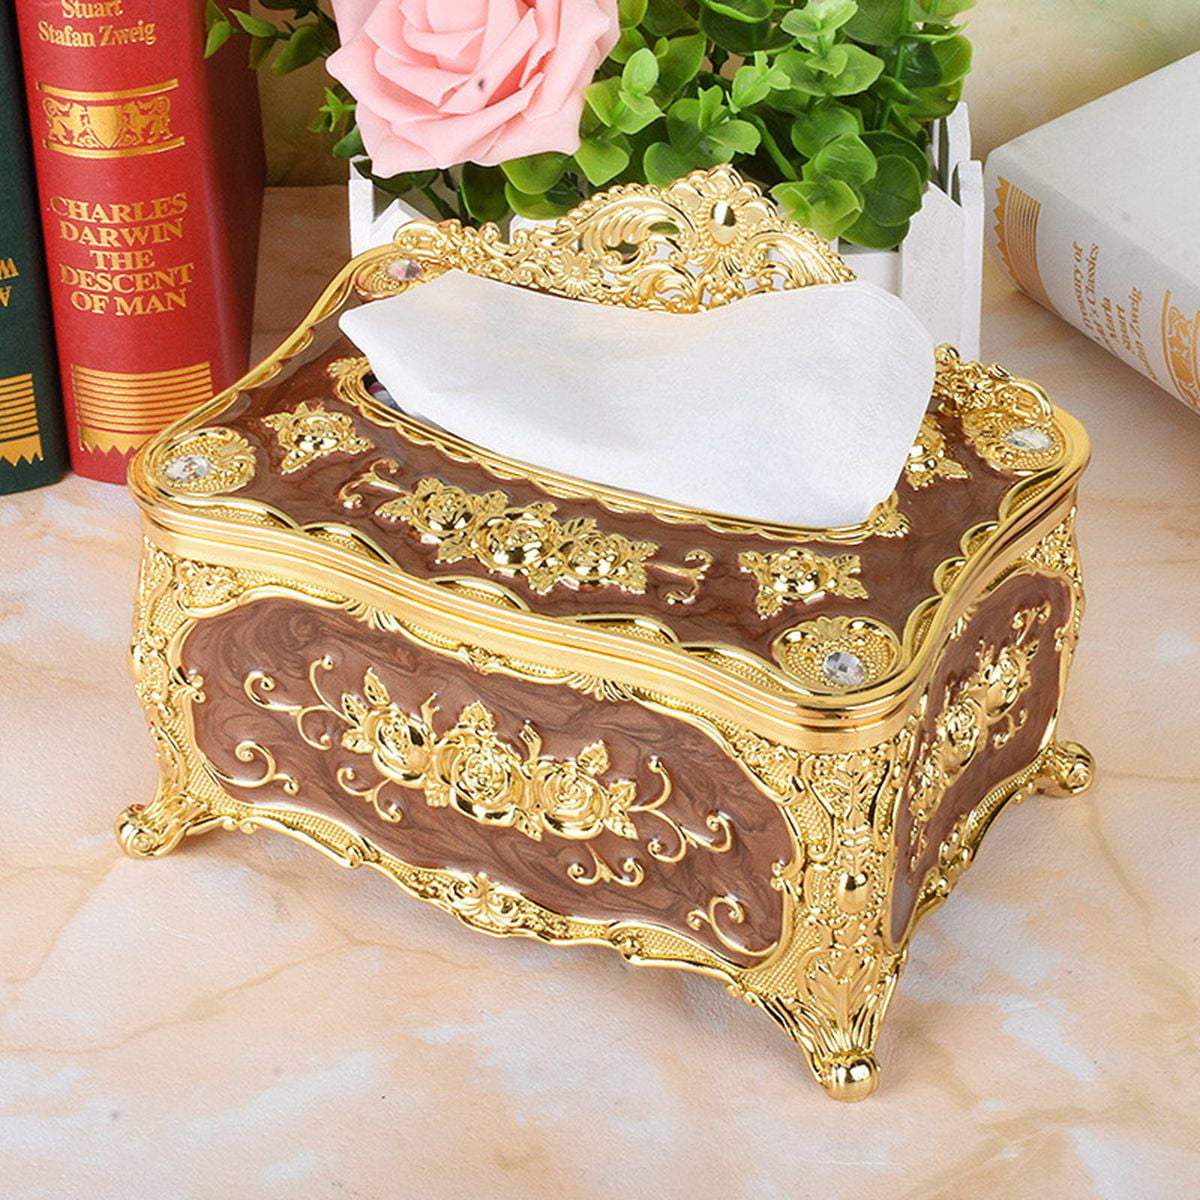 Details about   1PC Gold Tissue Box Cover Chic Napkin Case Holder Hotel Home Decor Organizer New 